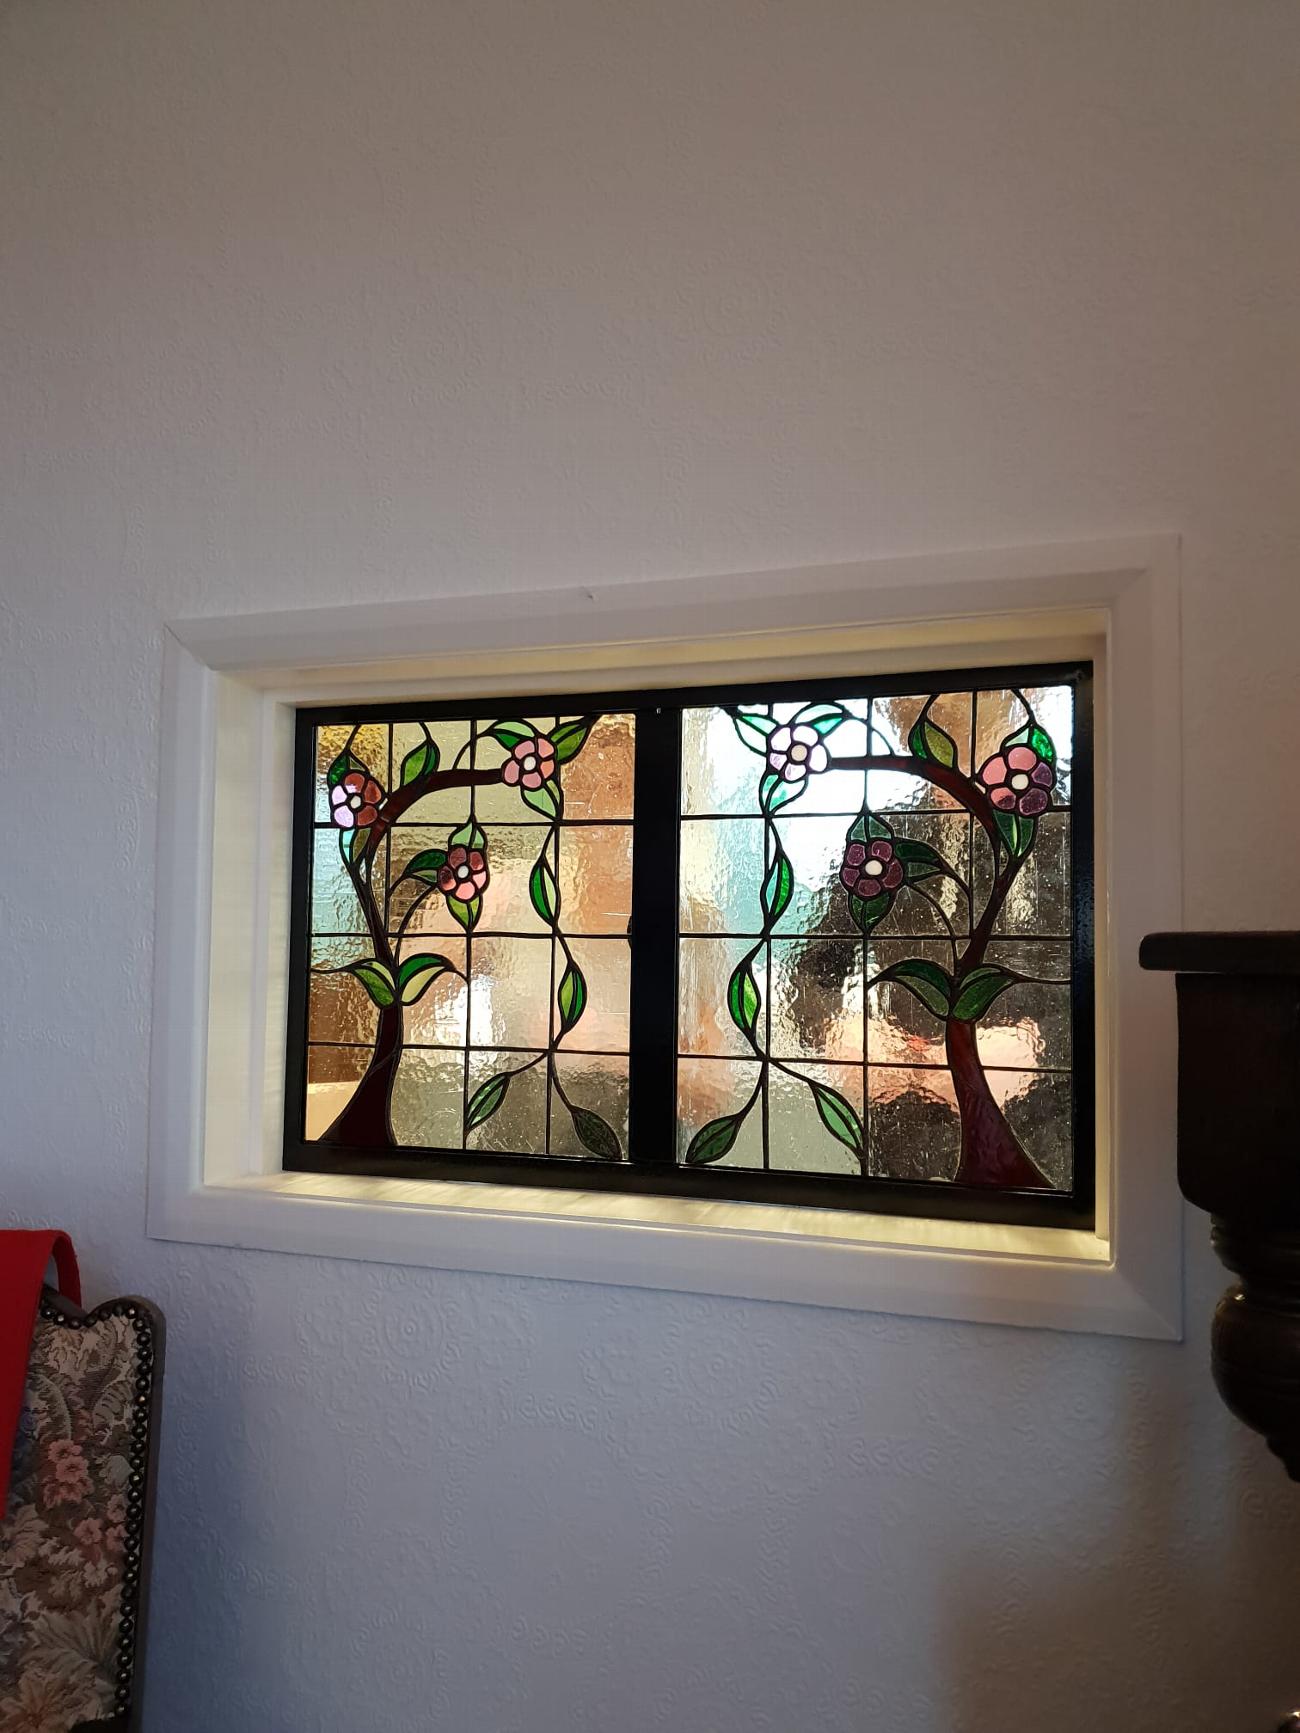 Church Stained Glass Repair | Harland and Co gallery image 13